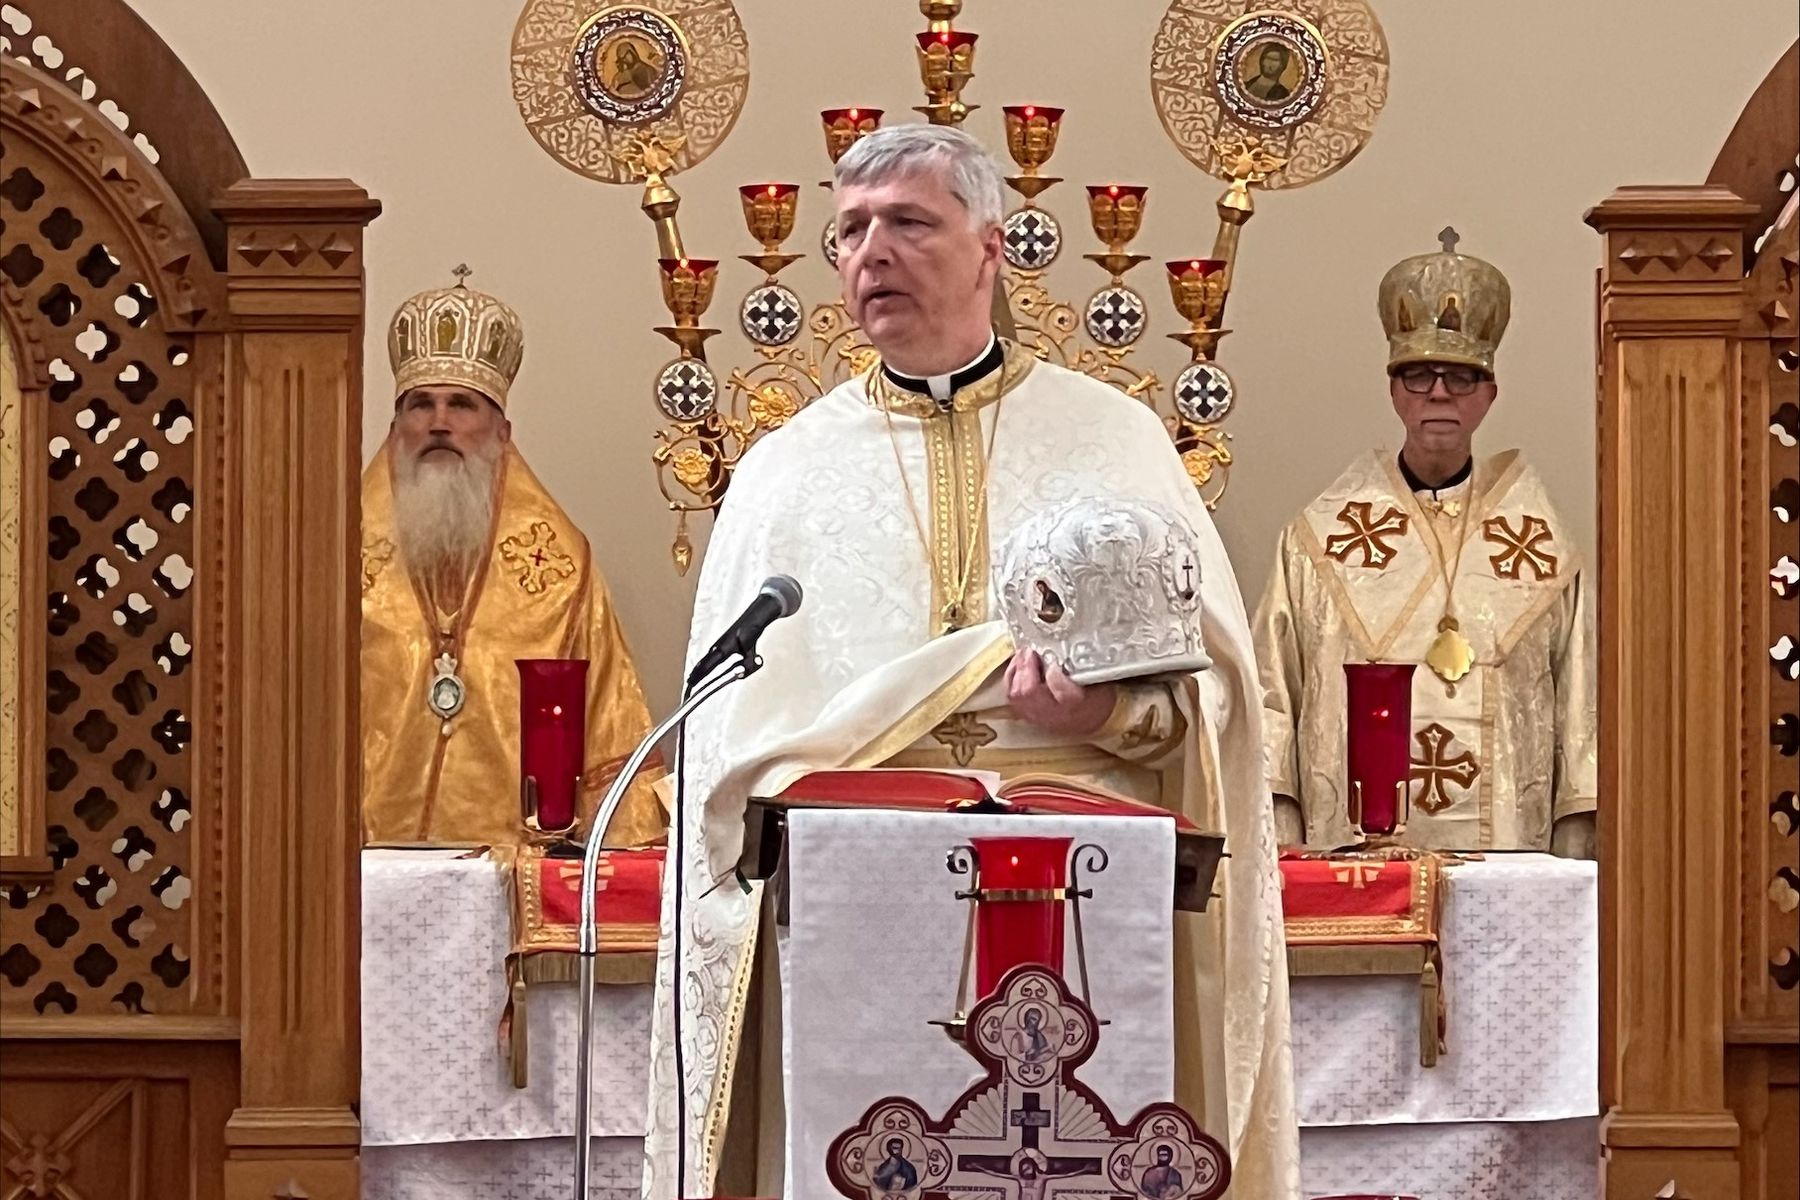 Father Mark Morozowich elevated to the Rank of Mitred Protopresbyter